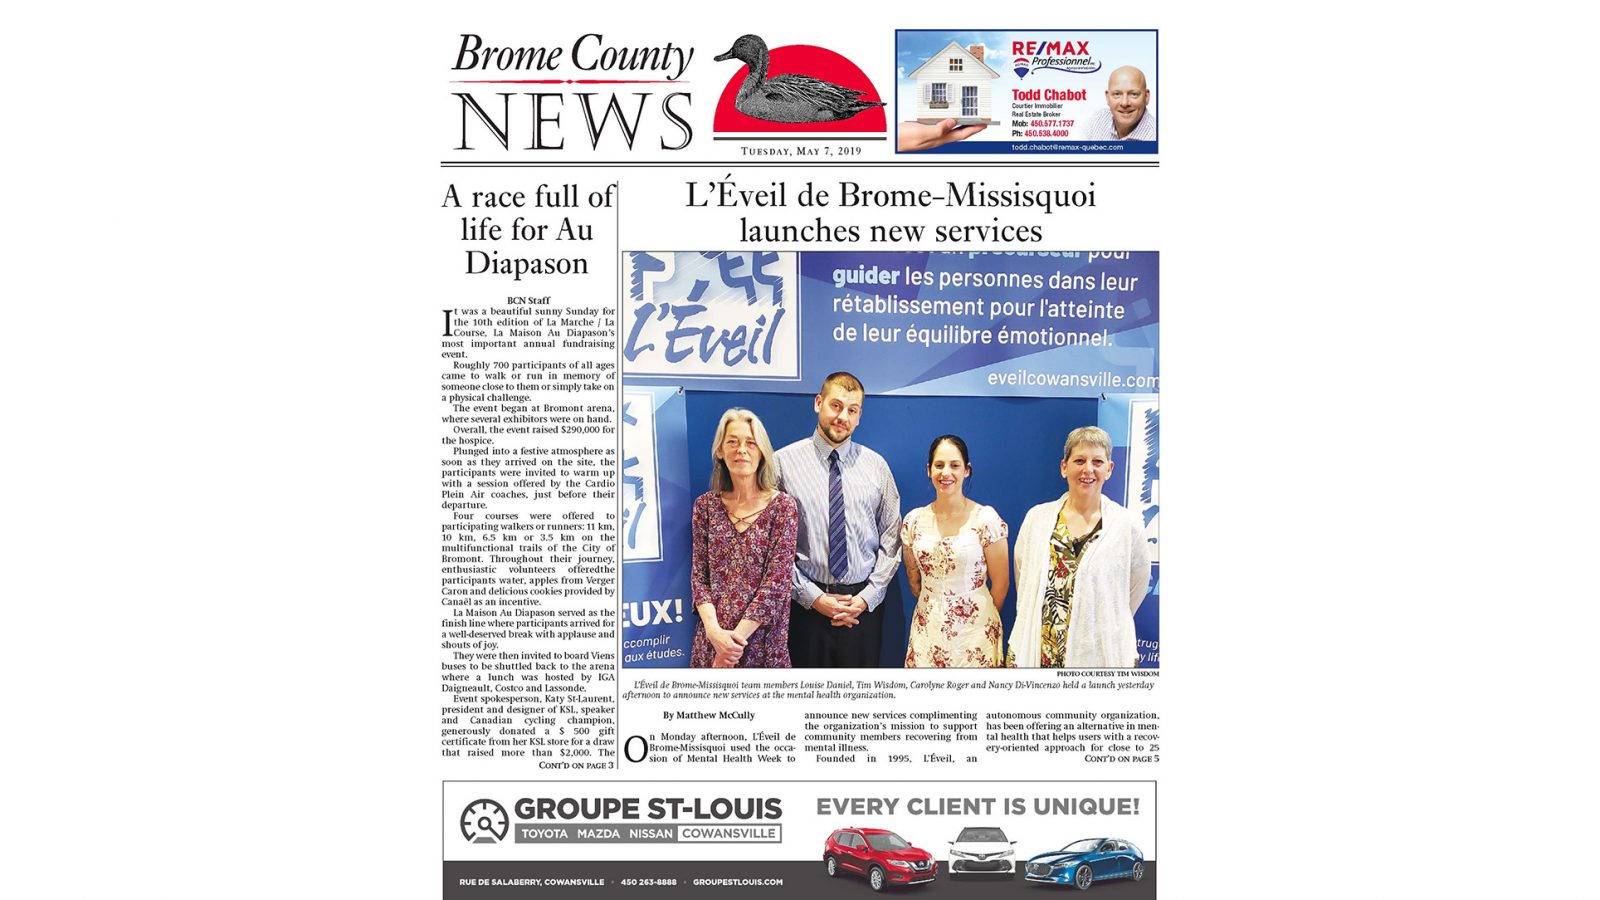 Brome County News – May 7, 2019 edition